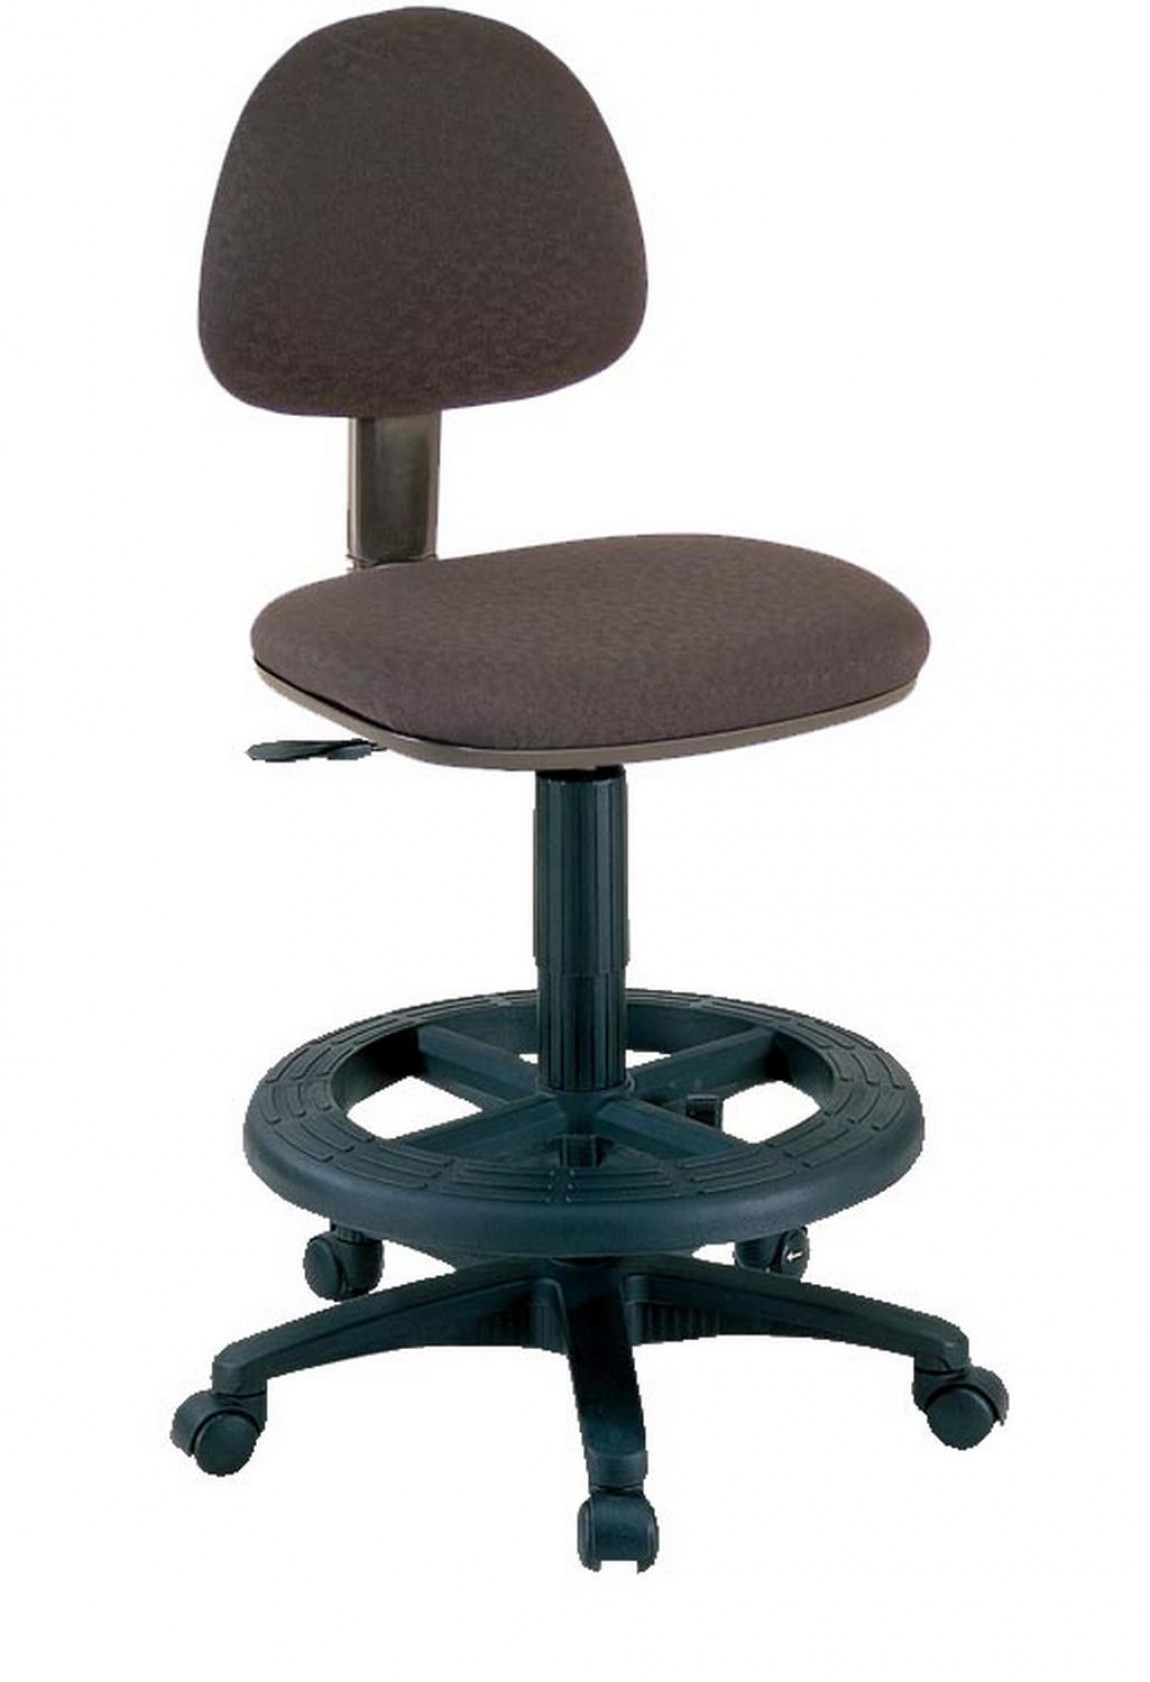 Black Stool Chair without Arms : Harmony Collection